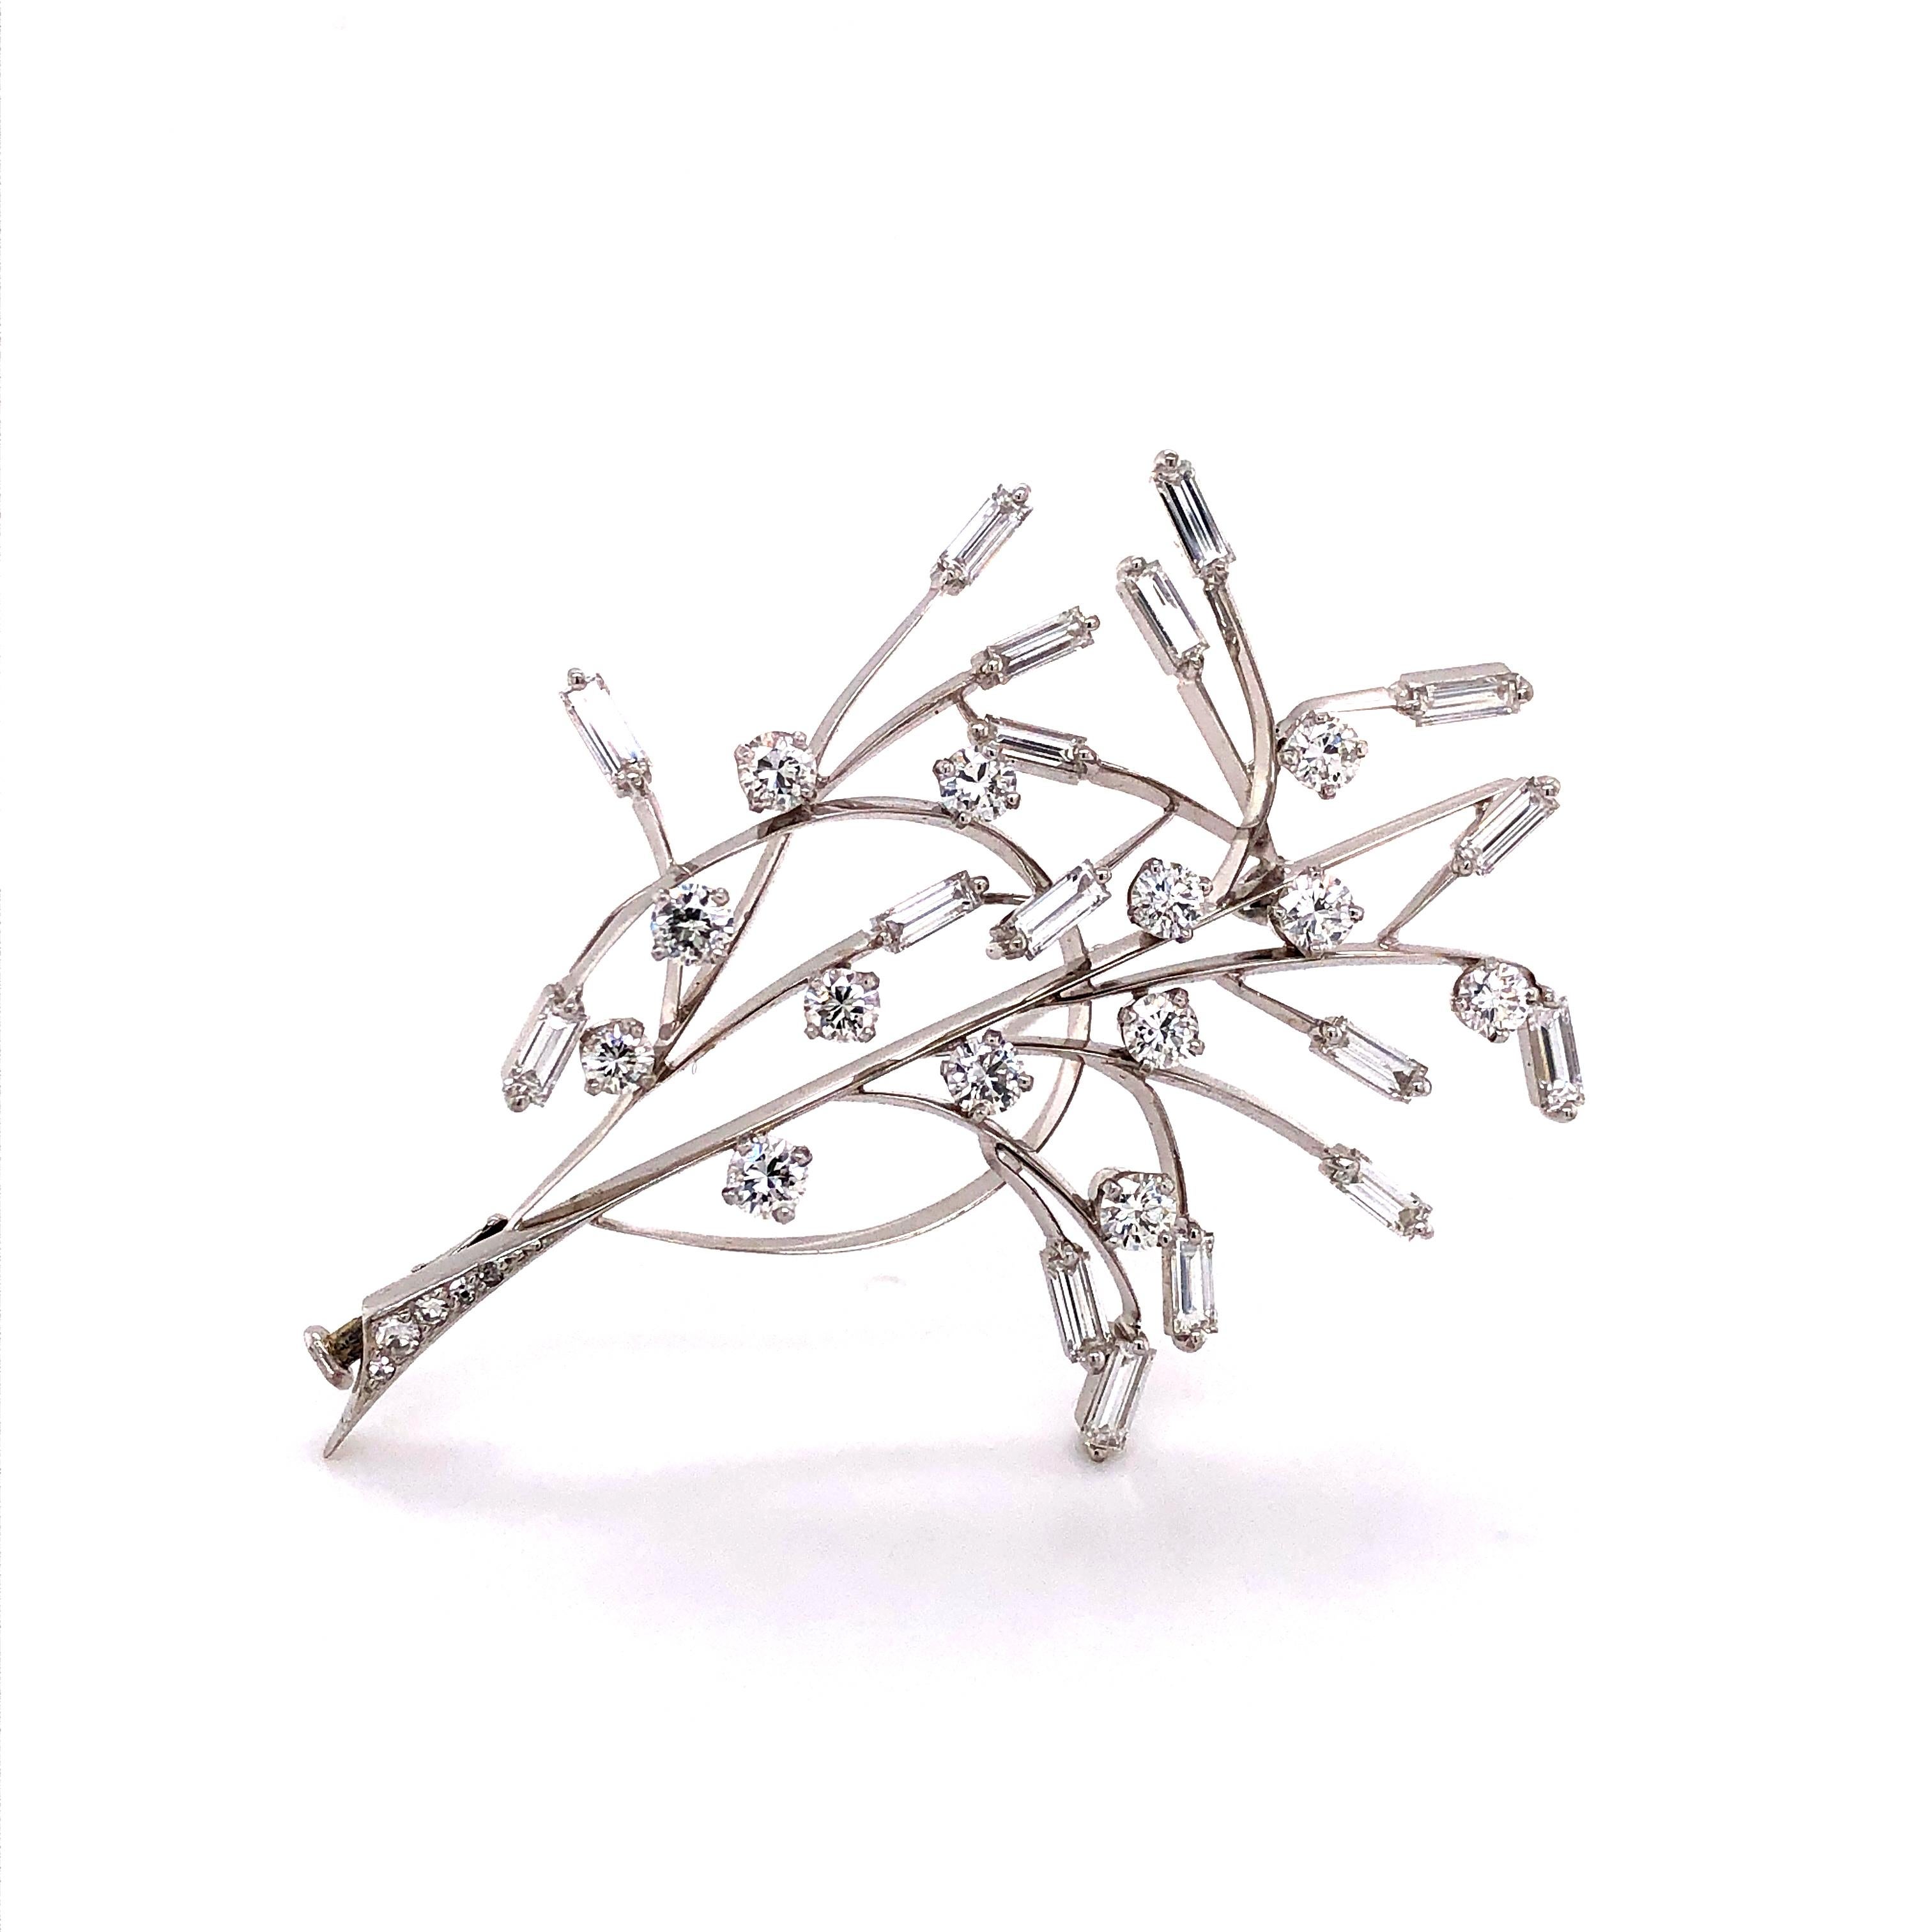 This little Diamond Tree in White Gold 750 is set with 13 Brilliants approximate 1.30 ct, 17 Baguette cut Diamonds approximate 1.70 ct and 5 single cut Diamonds (Quality: G/H-vs).  Imagine wearing this brooch on a little black dress the filigree